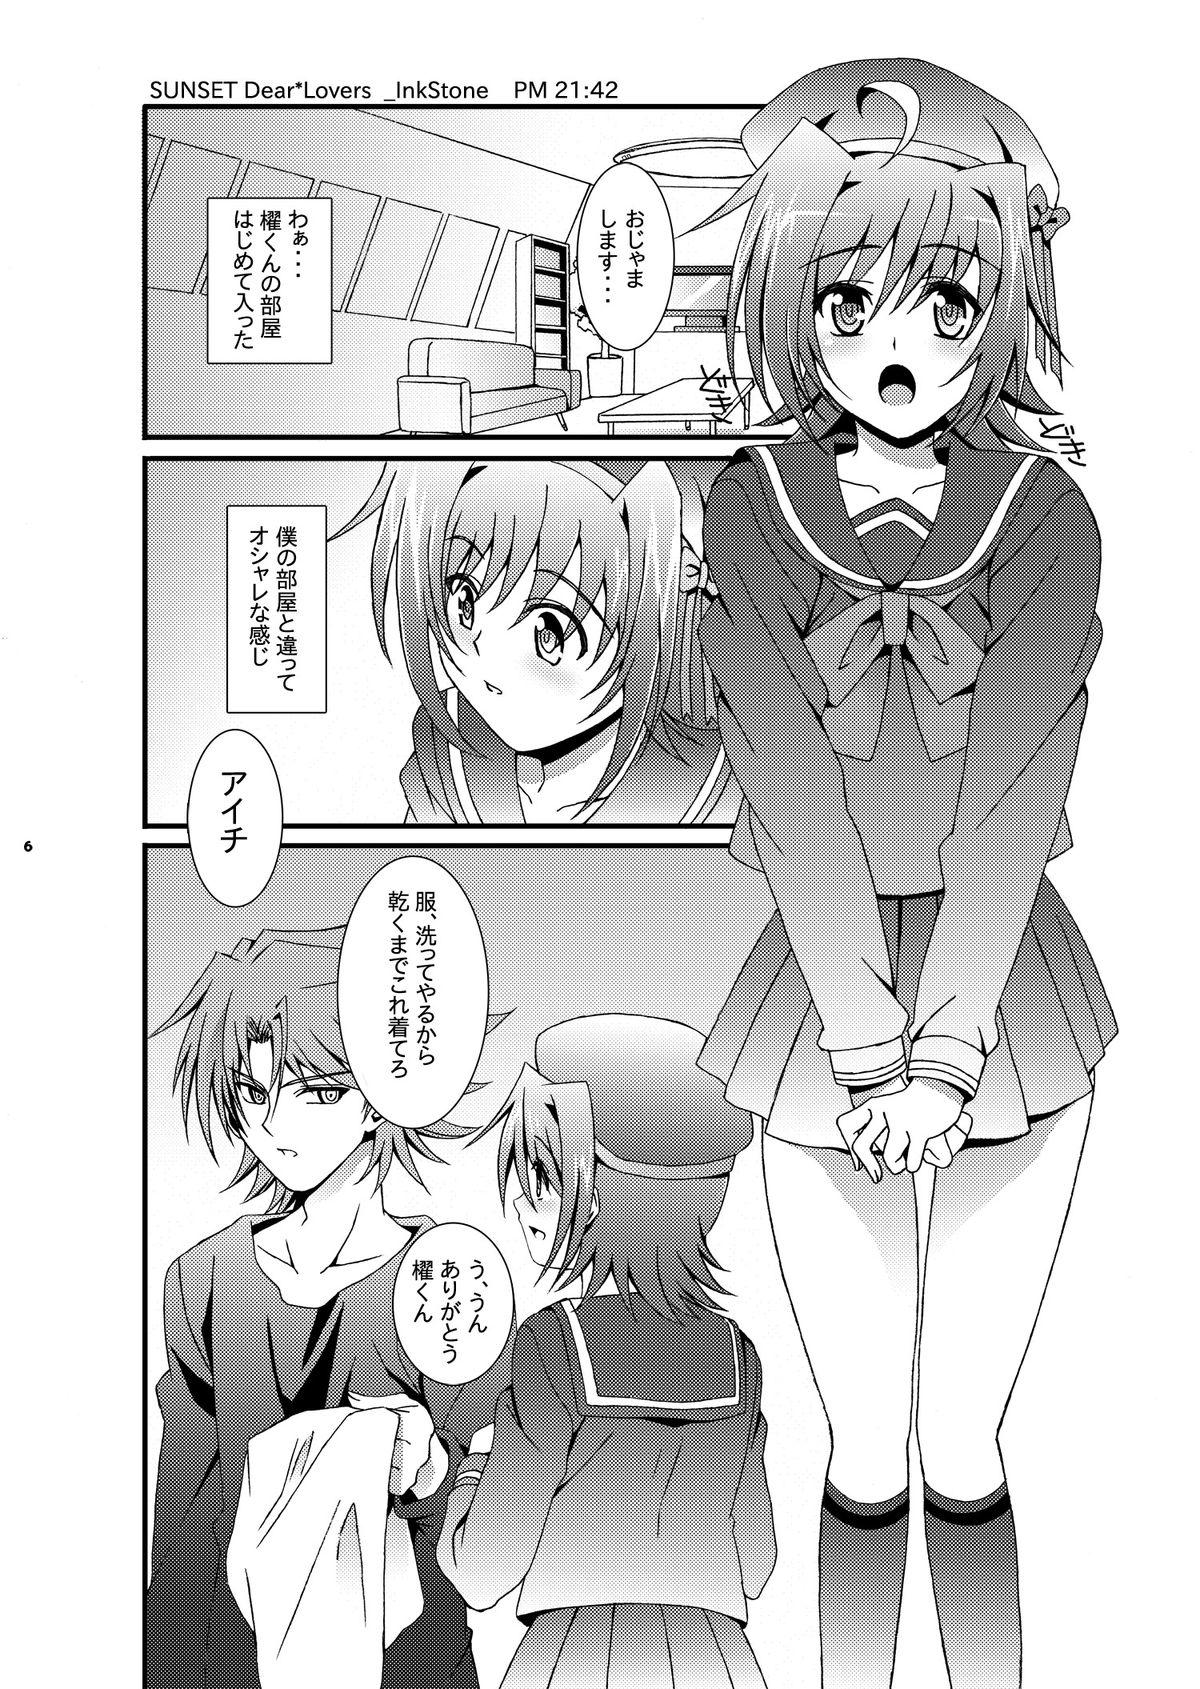 Zorra SUNSET Dear Lovers - Cardfight vanguard Banging - Page 7